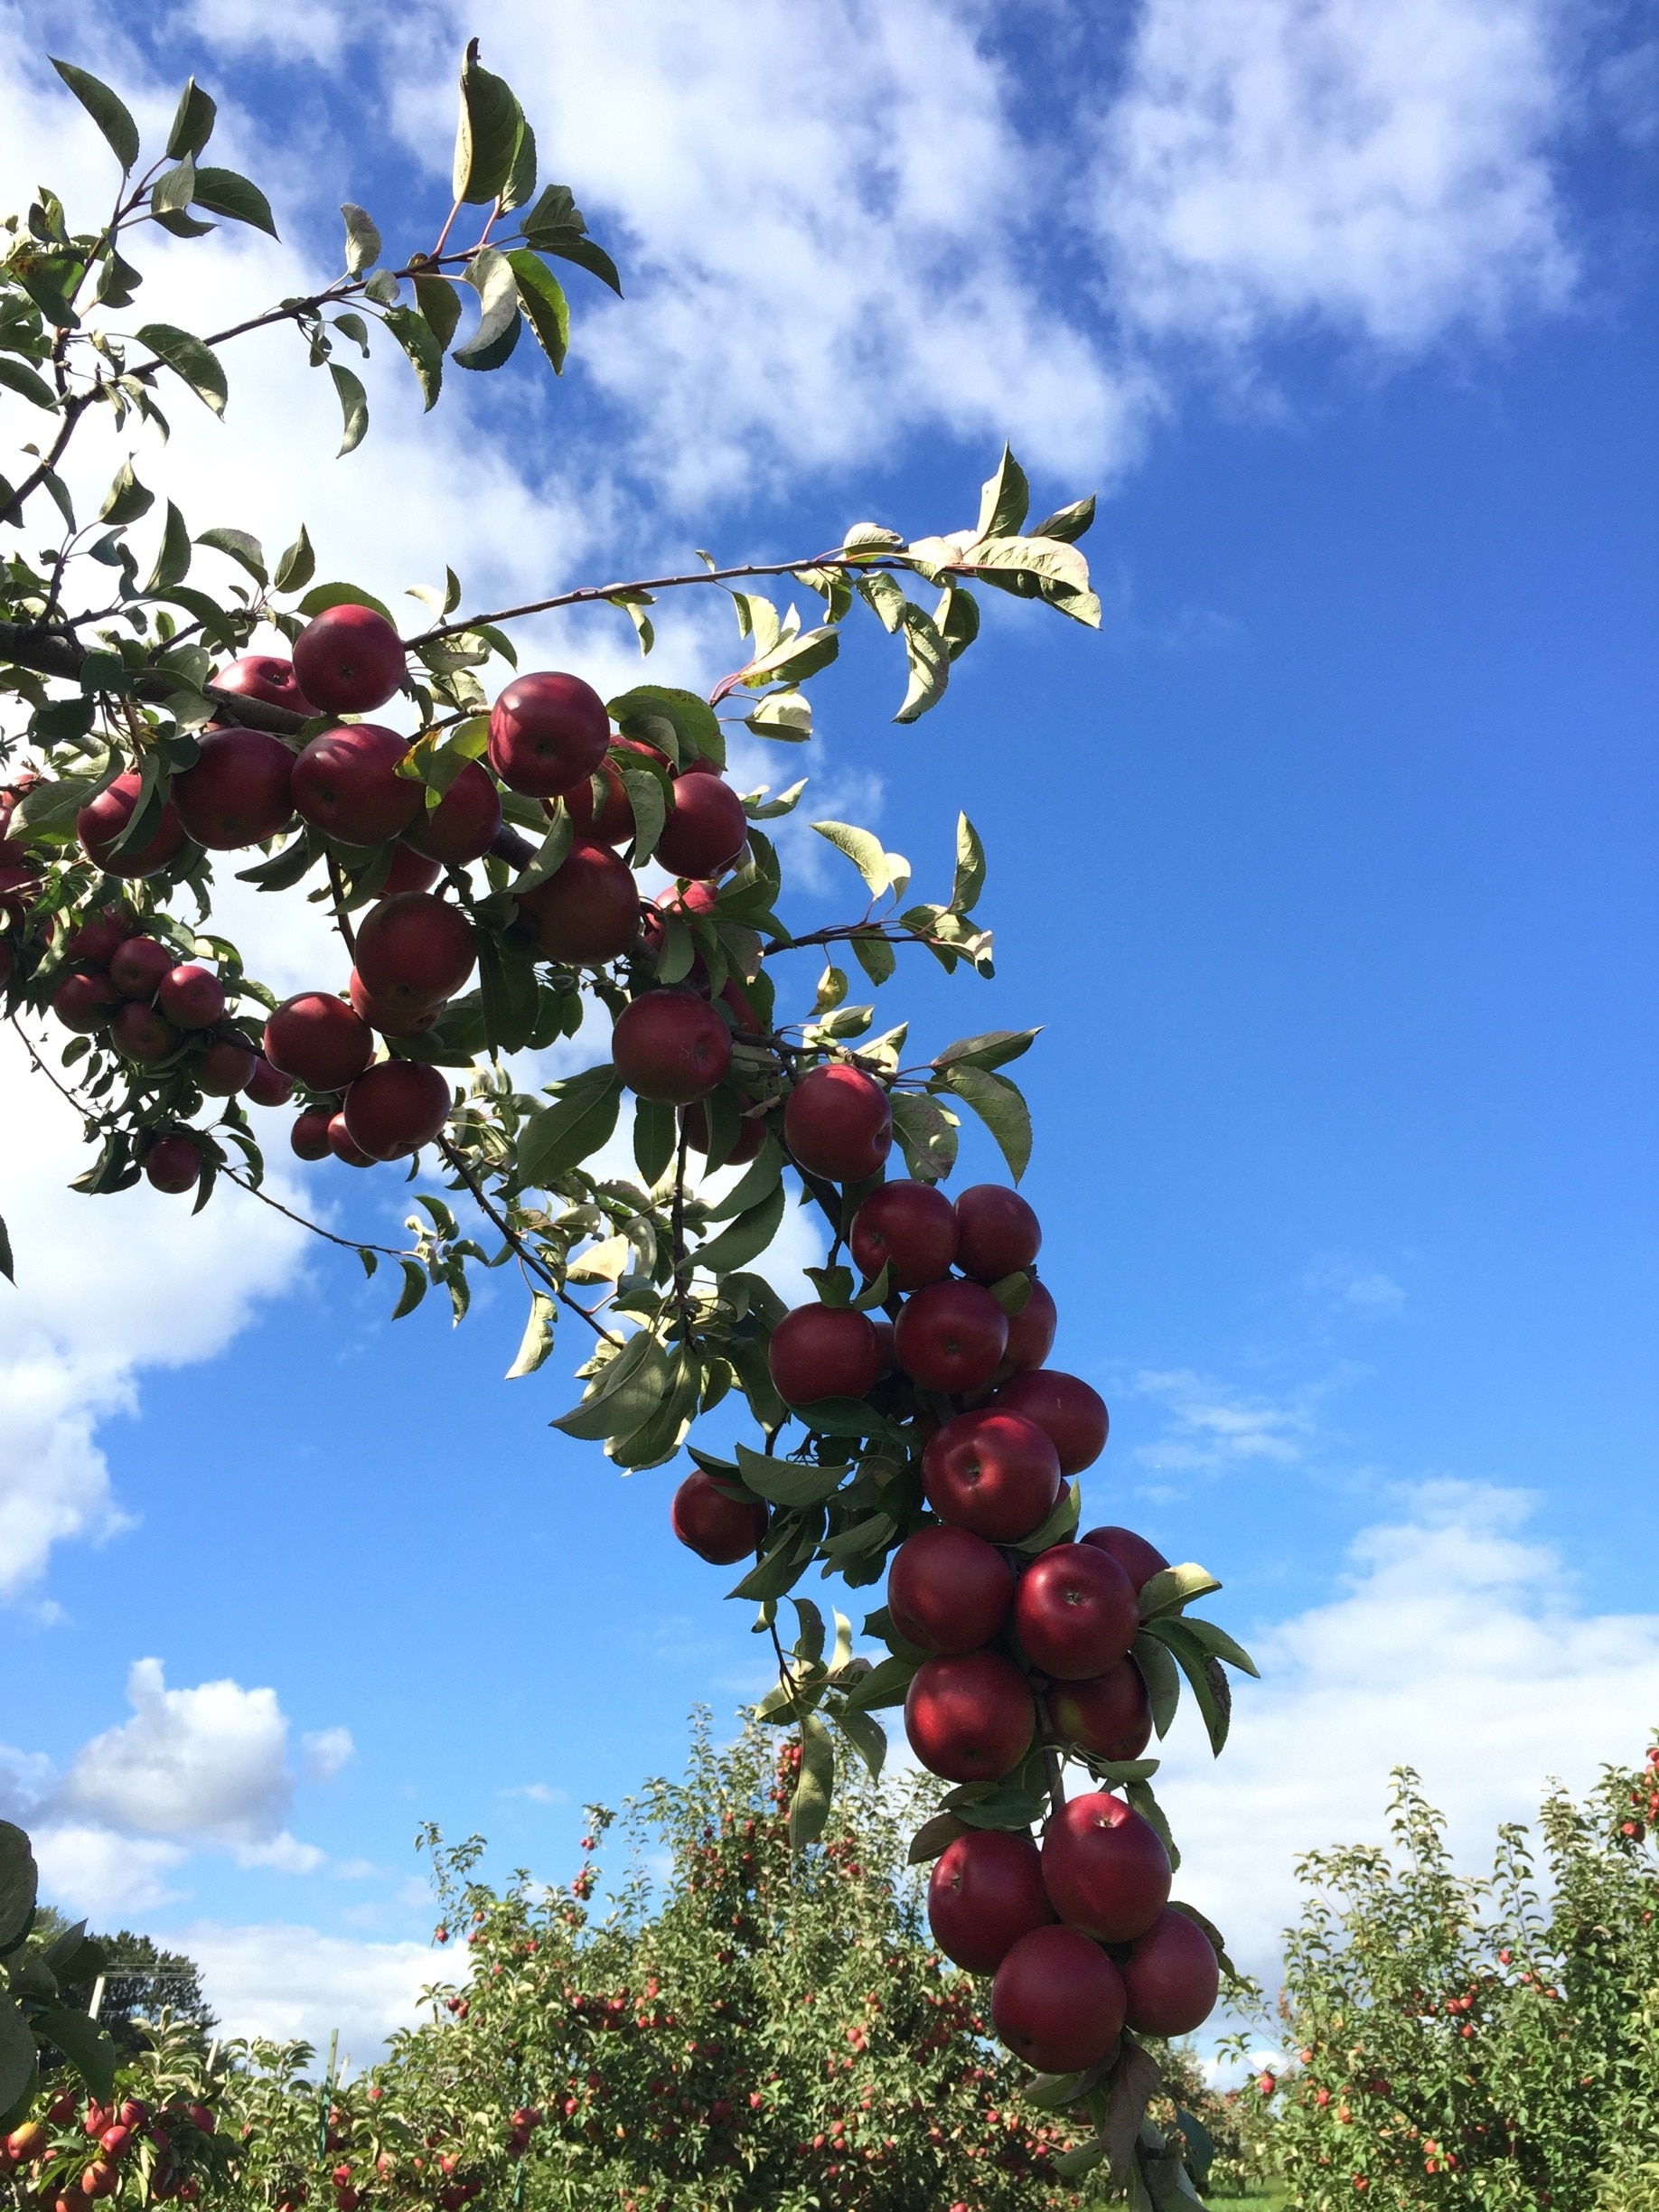 The apple bounty is rich this year. Applewood is a great place to wander the orchards tasting all the varieties and picking fresh apples to take home with you. 